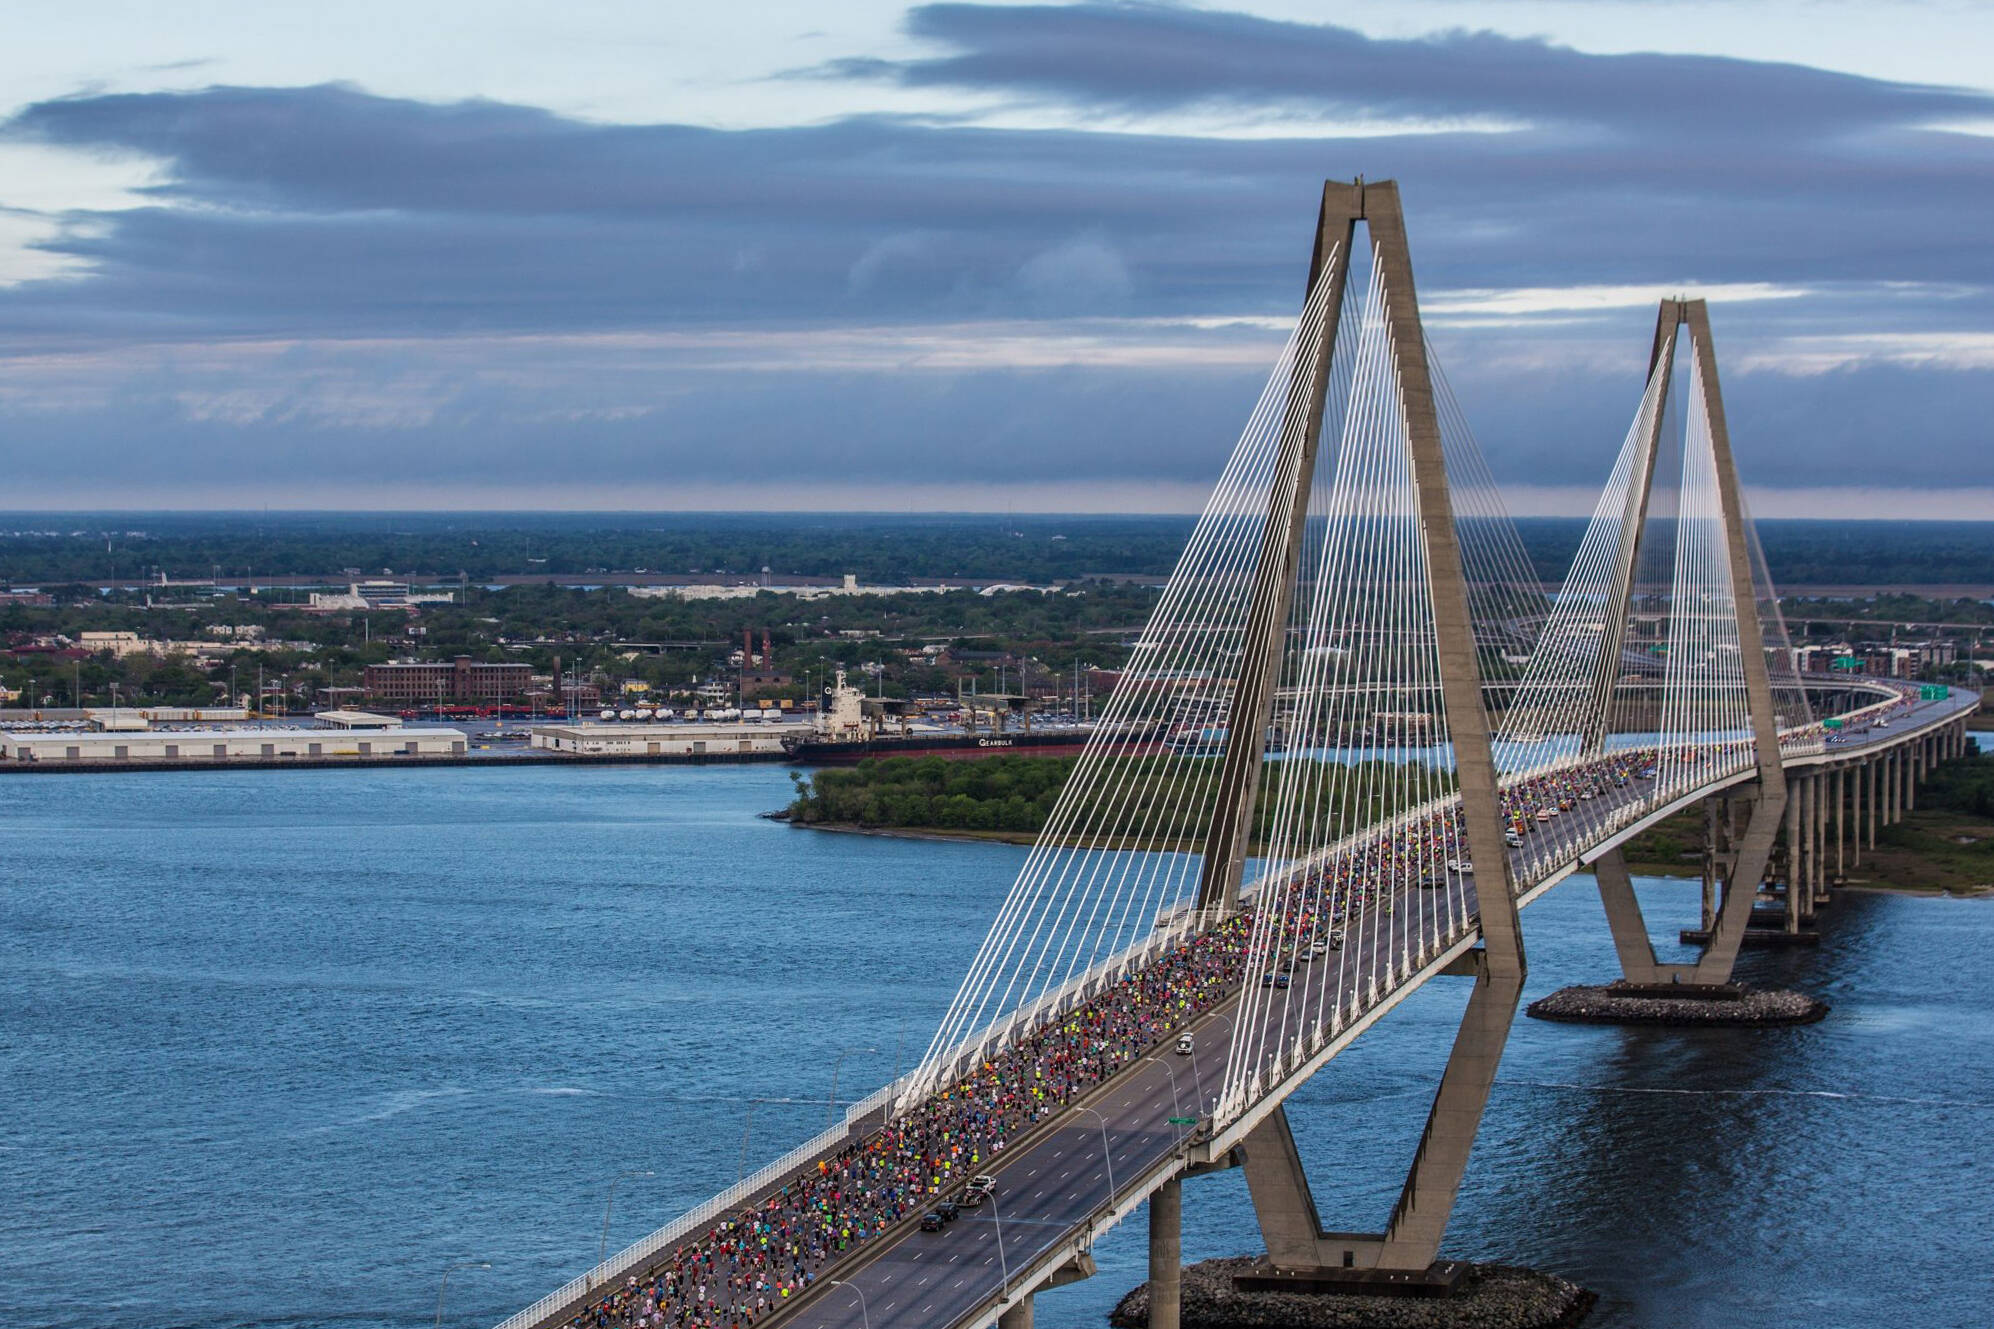 The countdown is on: Last chance to register for the Cooper River Bridge Run